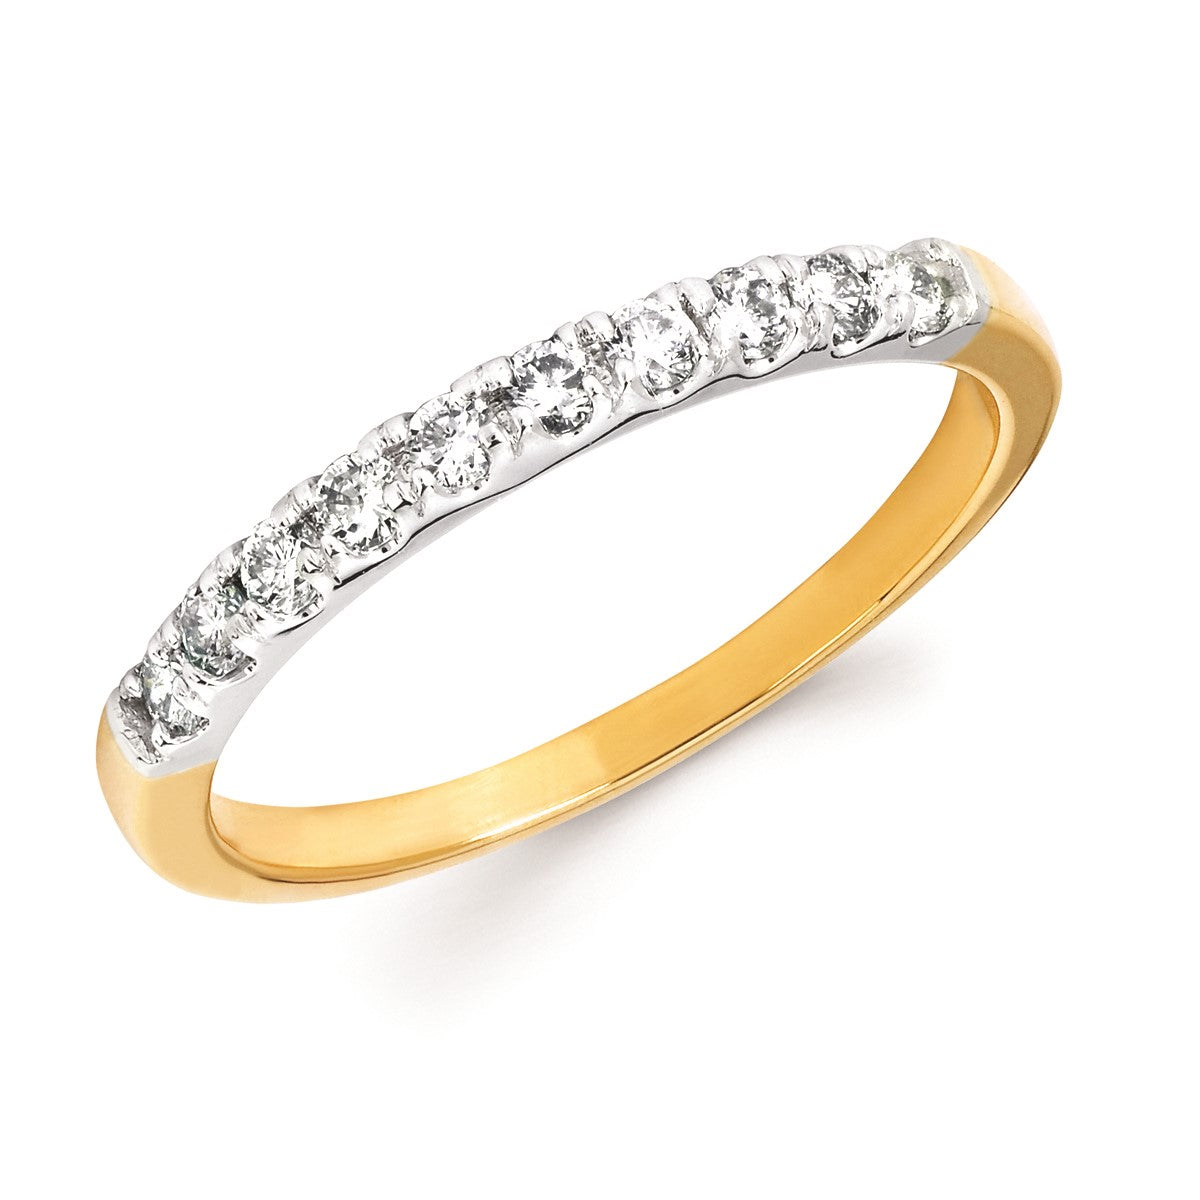 Diamond Anniversary Band in 14k Gold - 0.25, 0.75, 1.00 Carat Total Weights - Talisman Collection Fine Jewelers